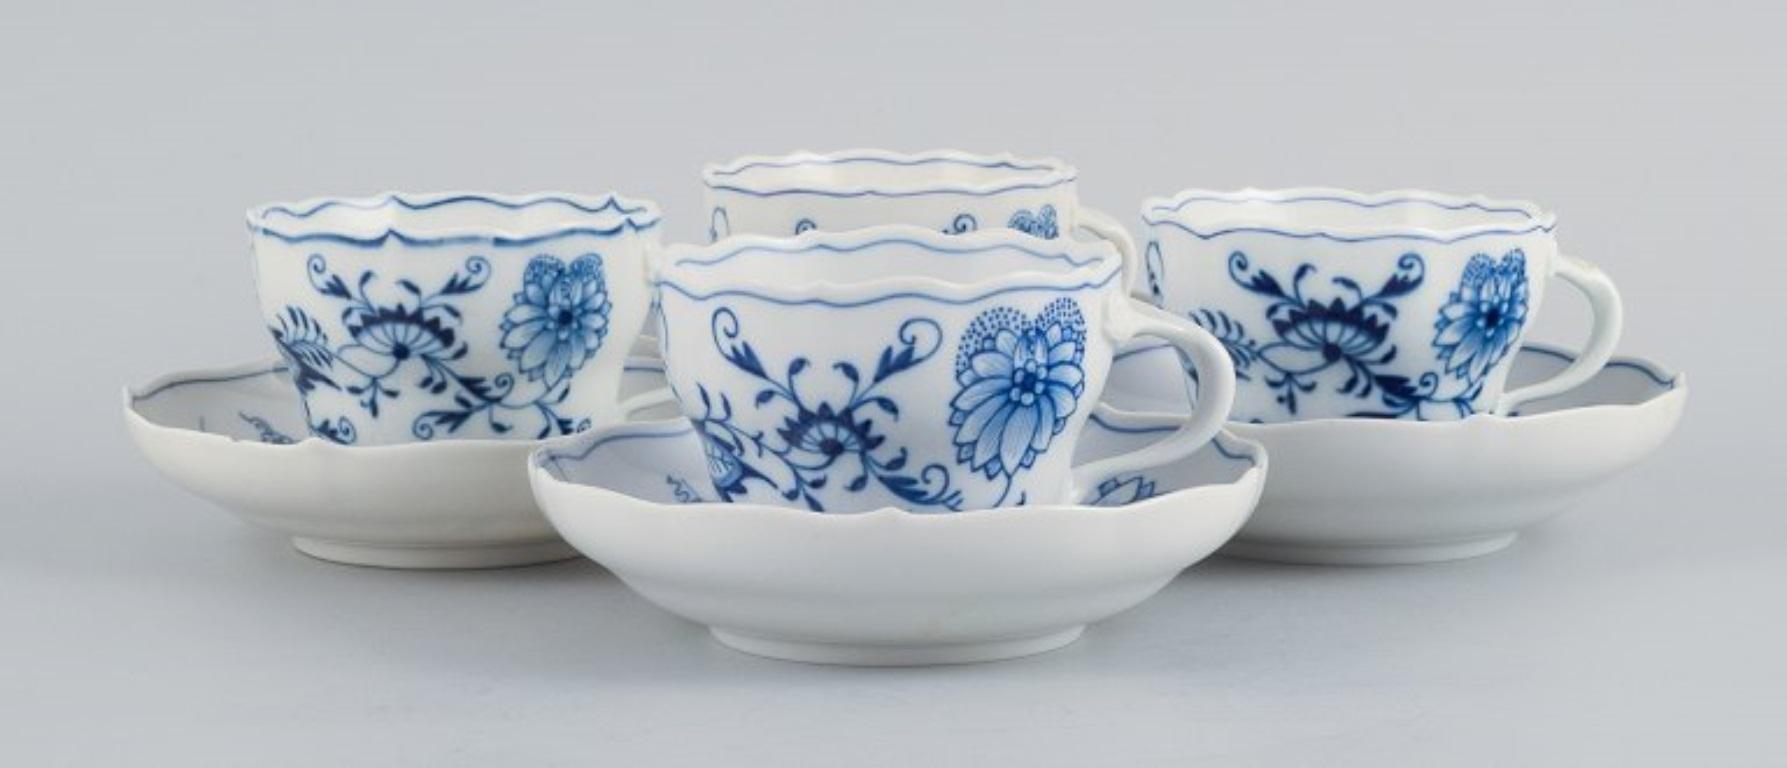 Meissen, Germany. Four Meissen Blue Onion coffee cups with saucers in hand-painted porcelain.
Approx. 1930s.
In excellent condition.
Marked.
First factory quality.
Cup: D 8.8 x H 6.7 cm.
Saucer: D 14.0 x H 3.0 cm.
The measurements may vary